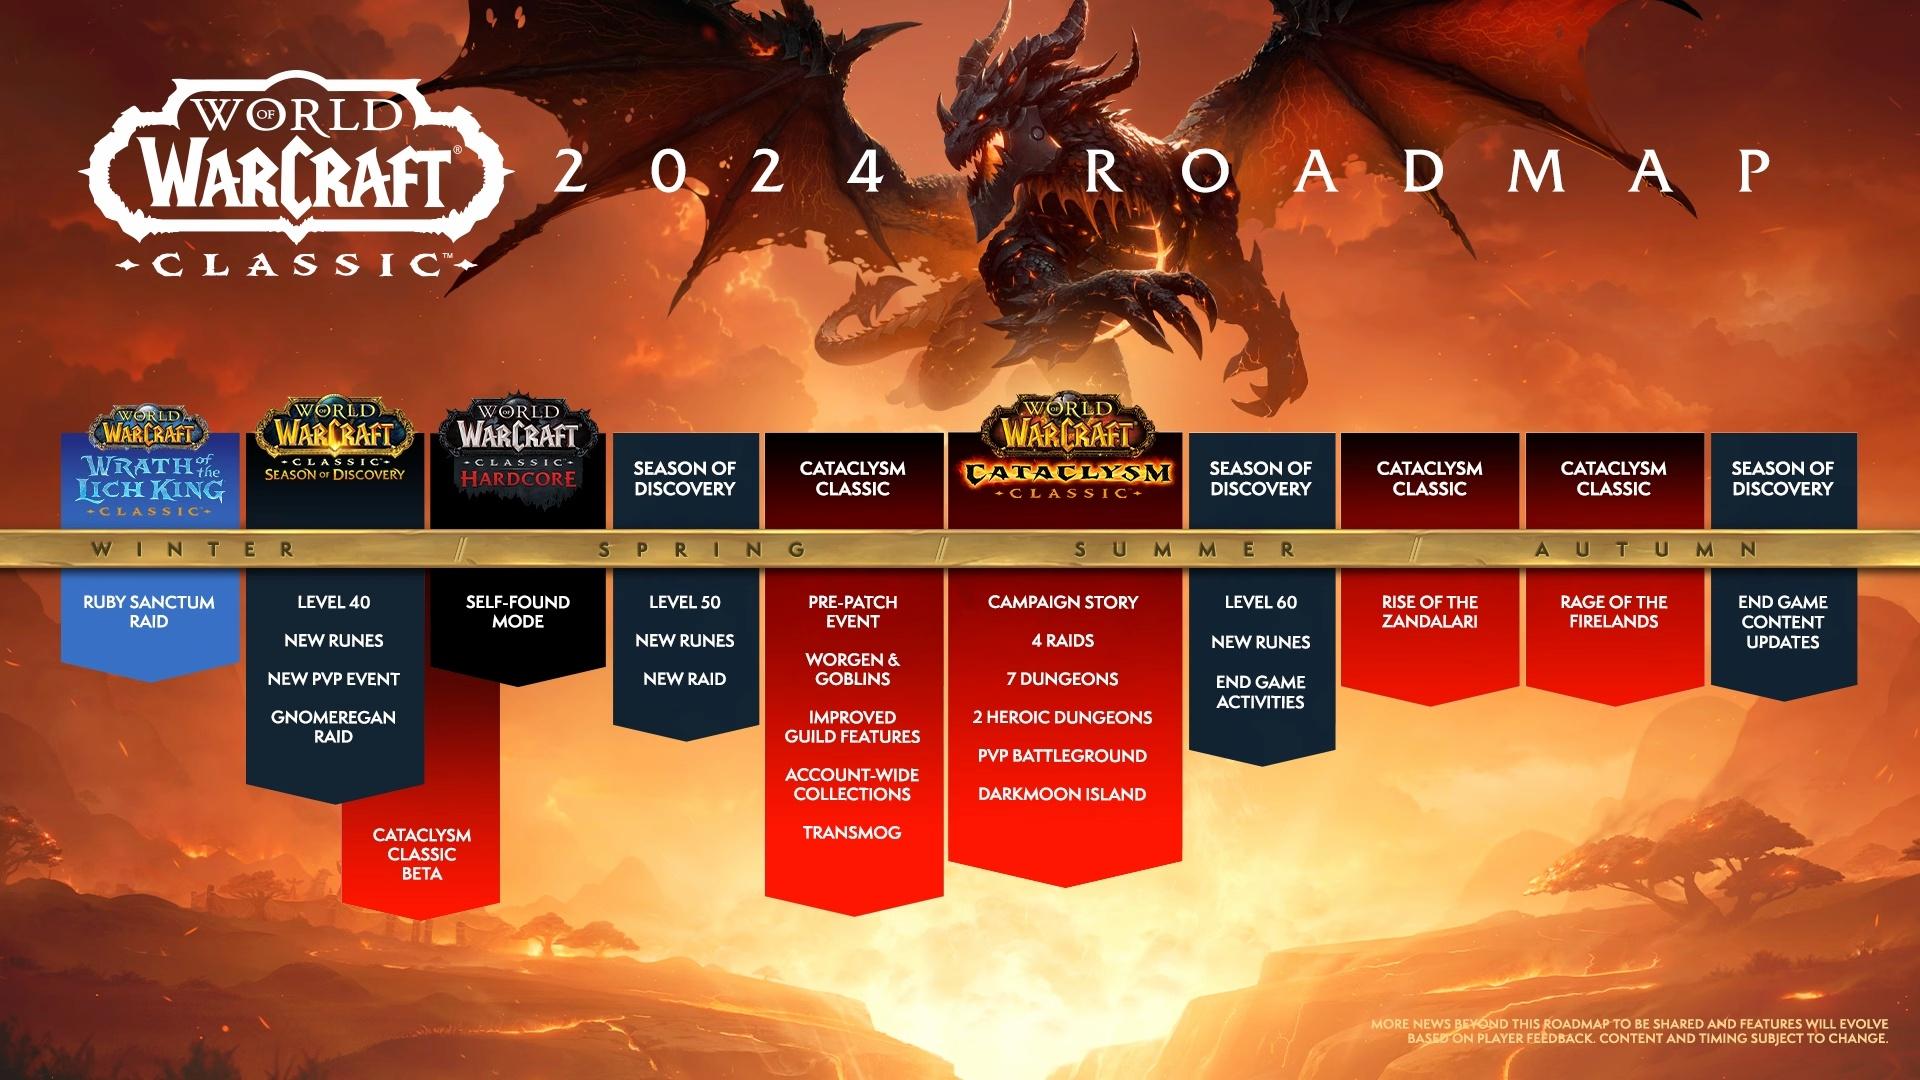 WoW Cataclysm Classic roadmap revealed, beta signups now live